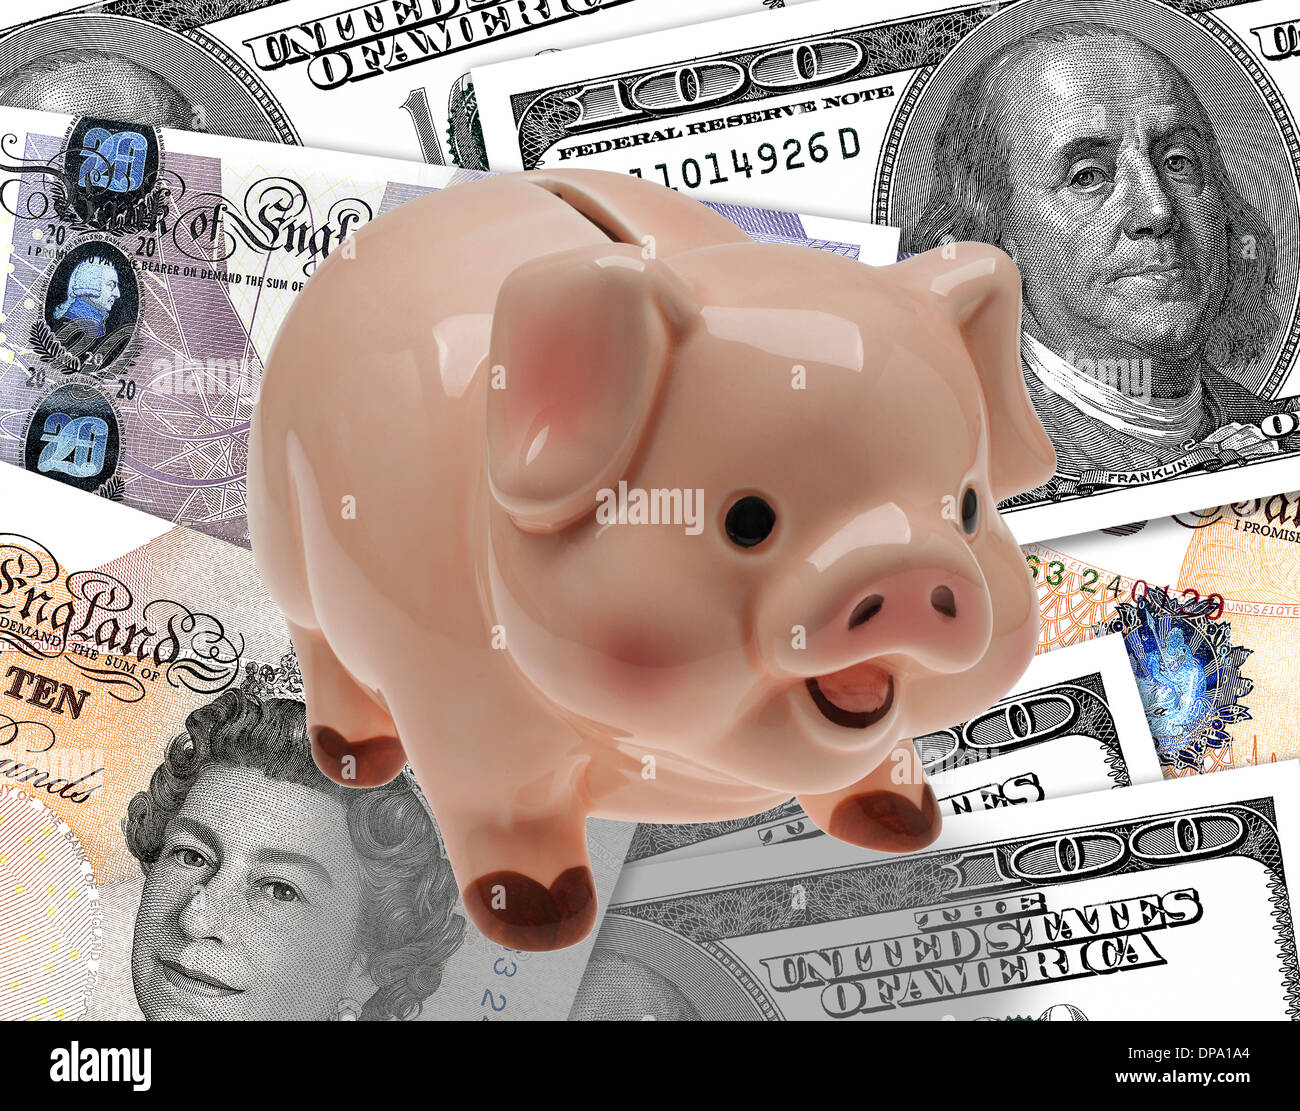 China/ceramic child’s savings or piggy bank on background of pound and dollar currency. Stock Photo